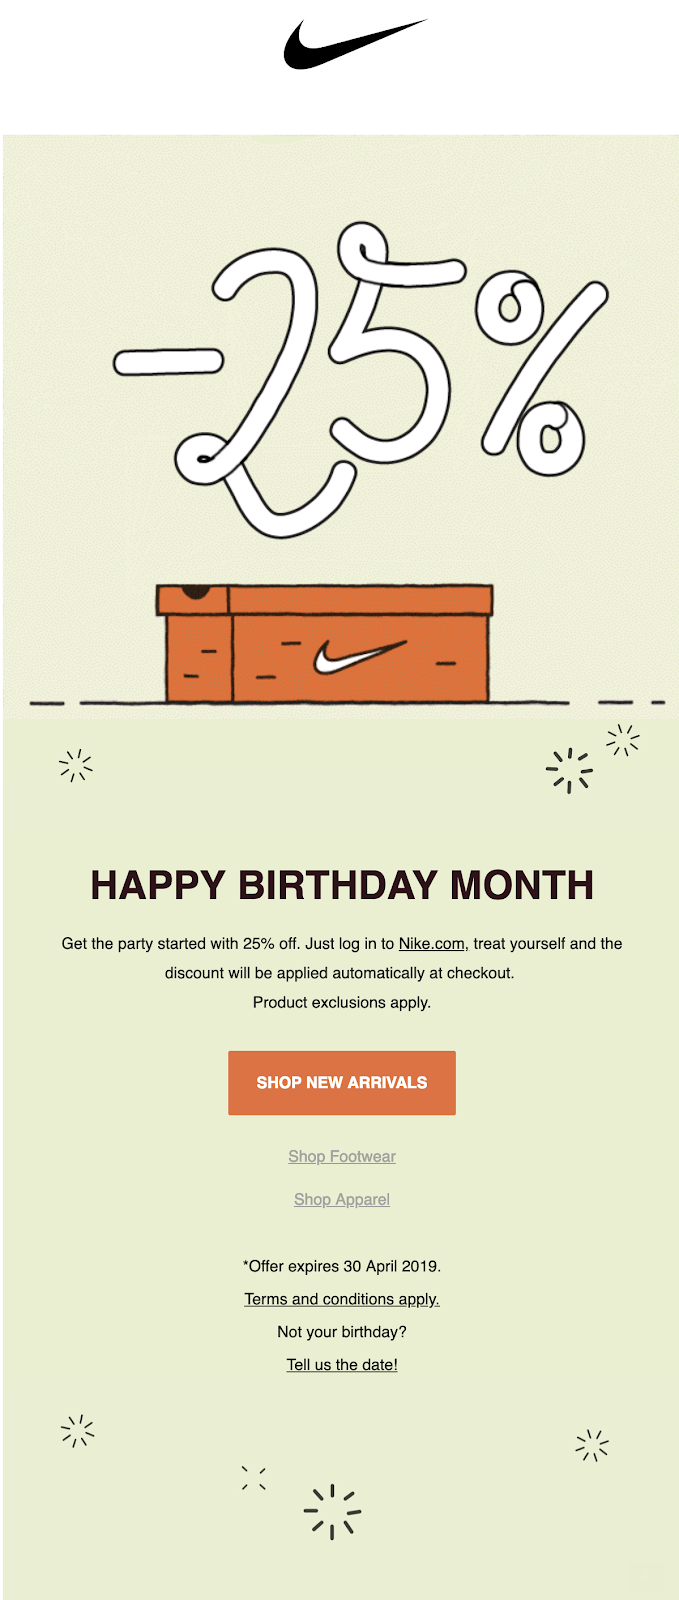 Screenshot of birthday-centric discount offer email from Nike